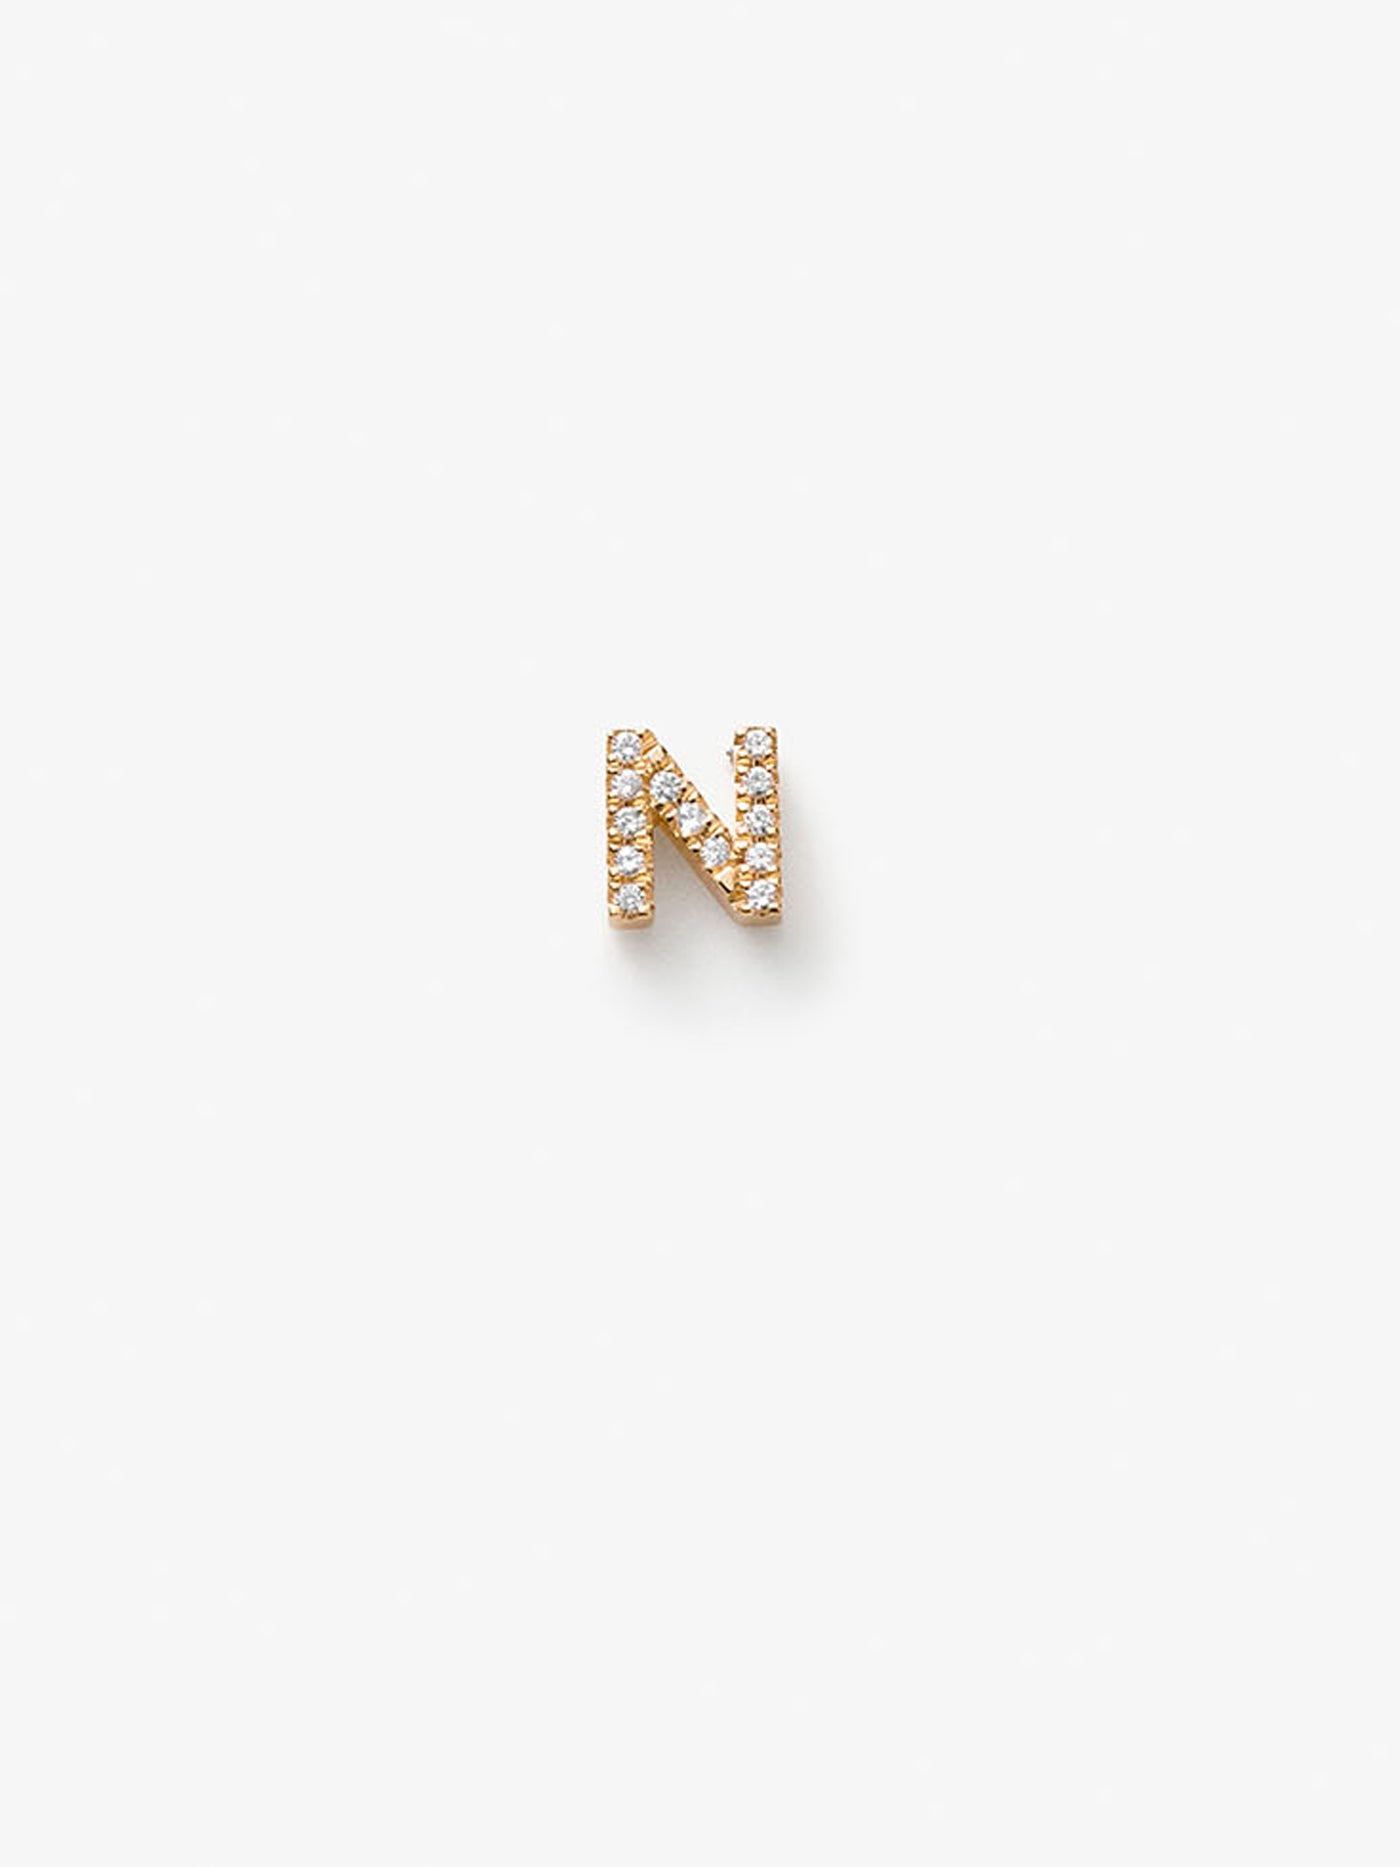 Letter N in Diamonds and 18k Gold